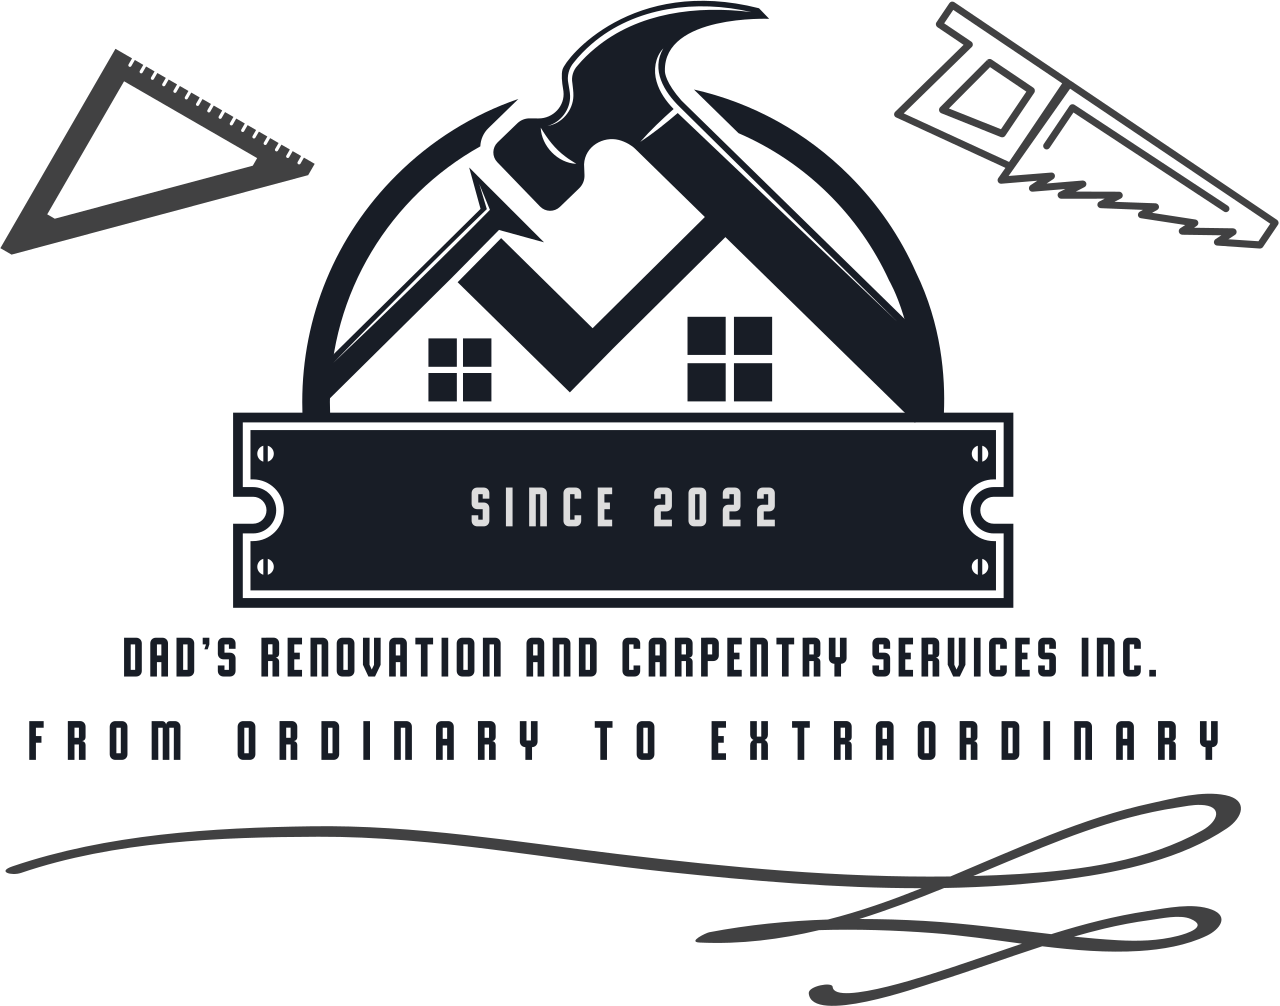 Dad’s Renovation and Carpentry Services Inc.'s logo